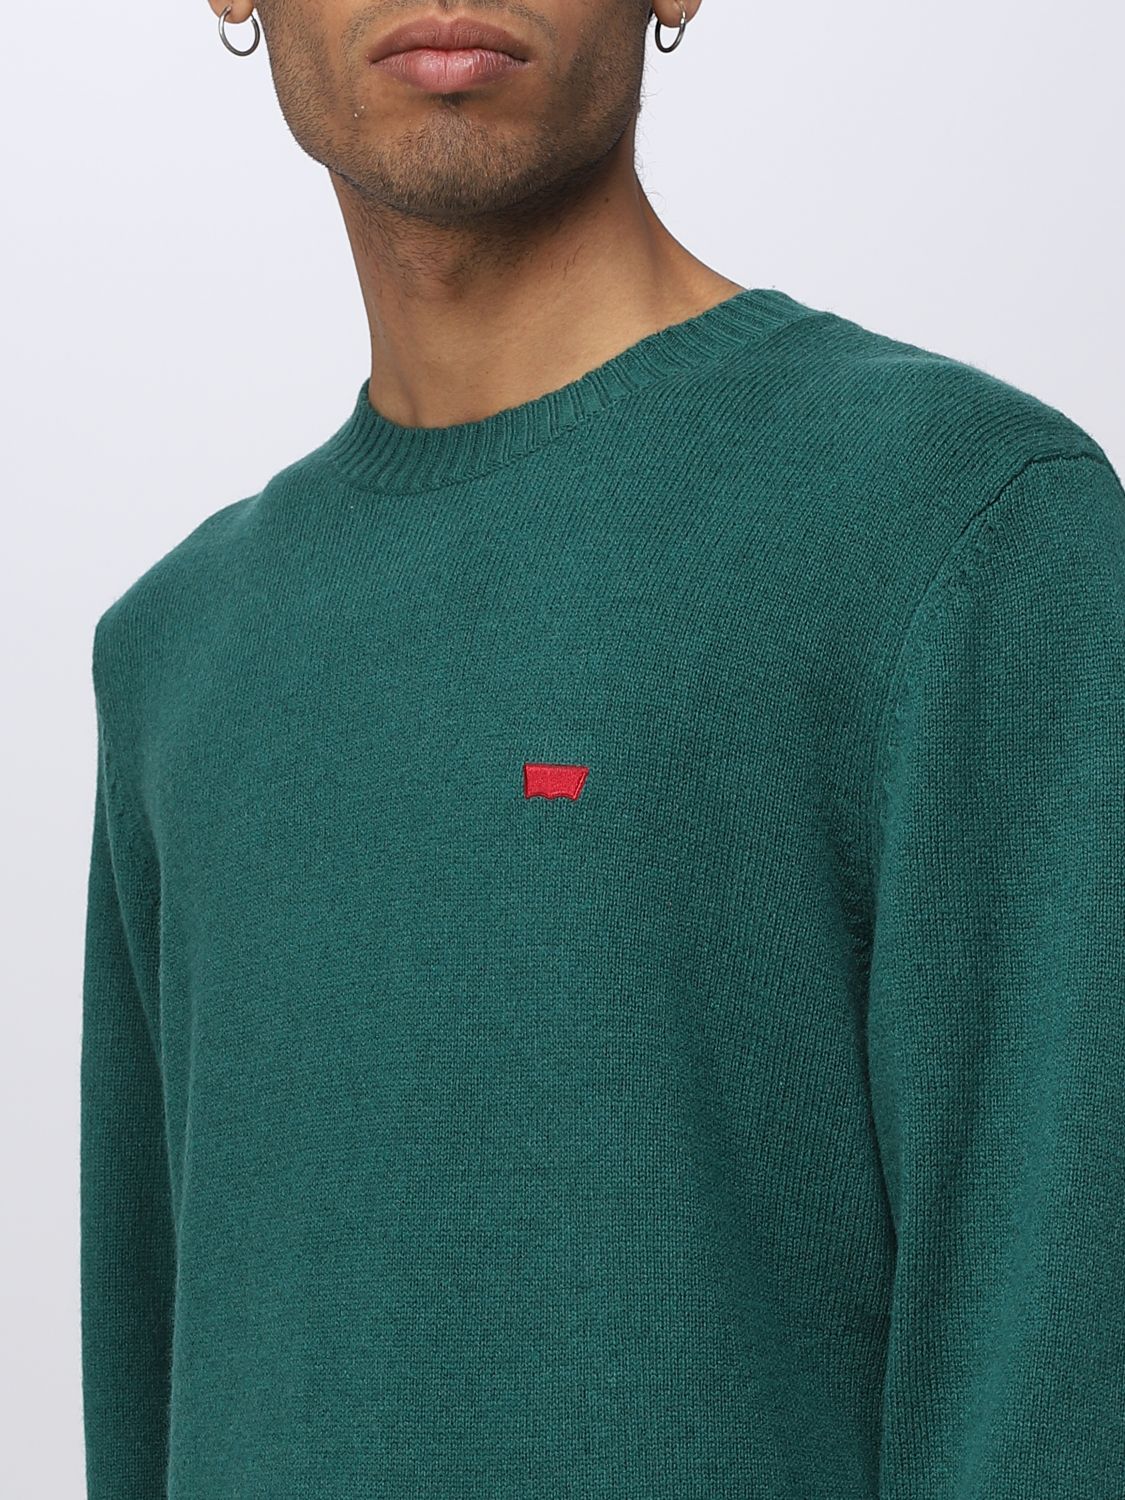 LEVI'S: sweater for man - Green | Levi's sweater A43200003 online on ...